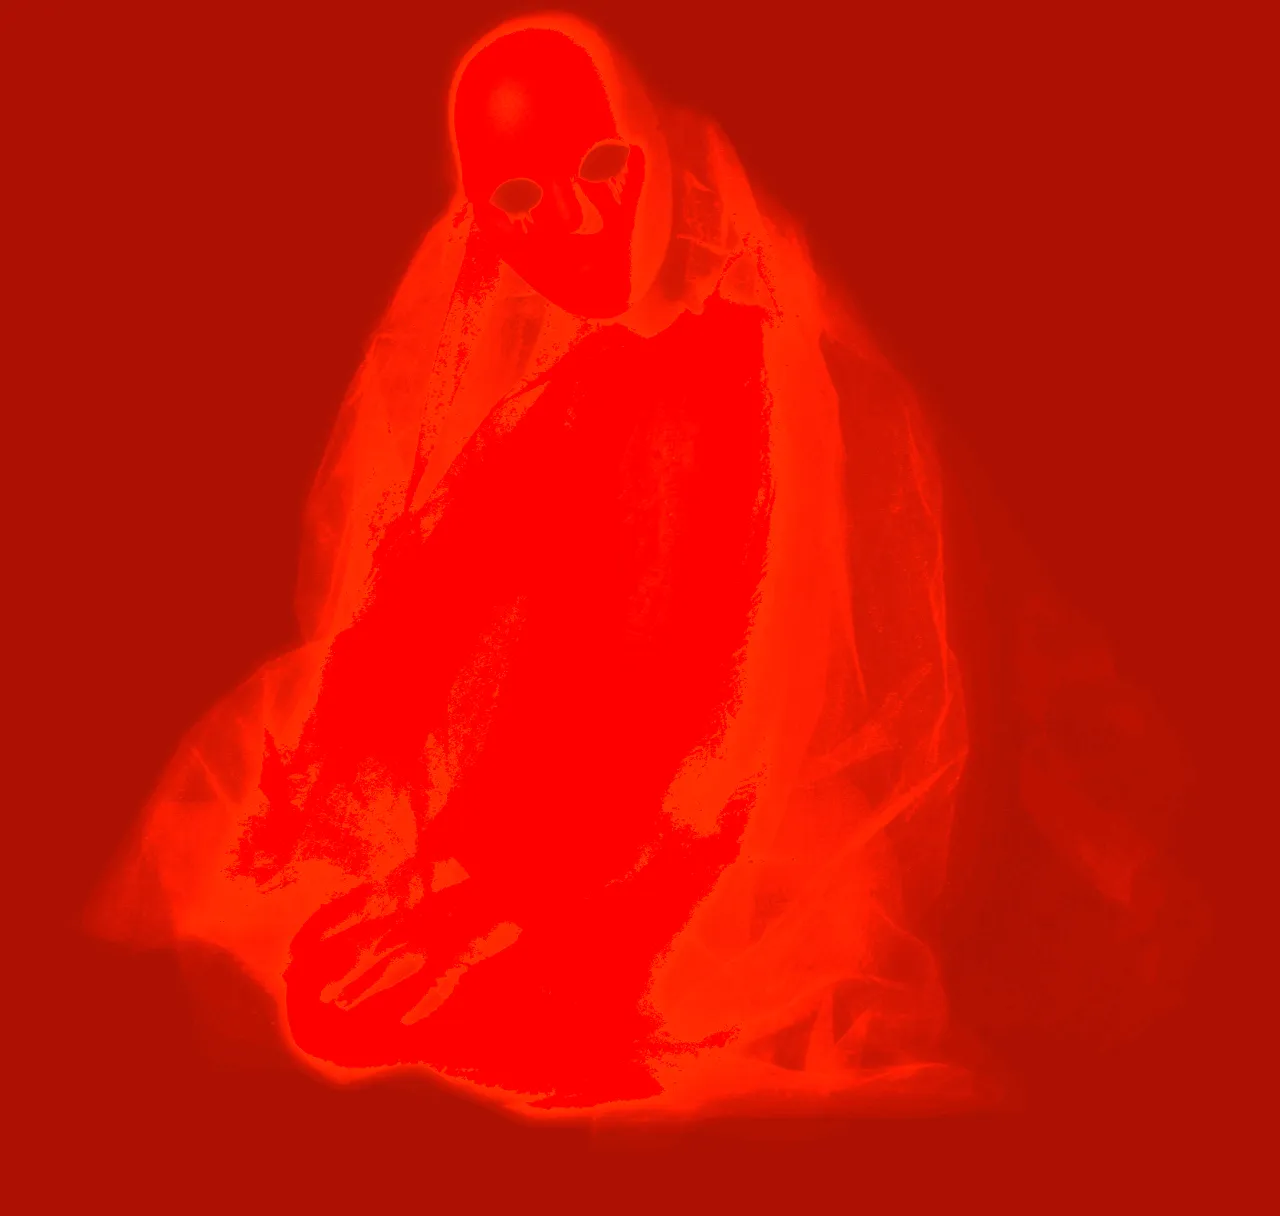 A person in a red veil standing on the edge of a bottomless red abyss, shrouded in mist.